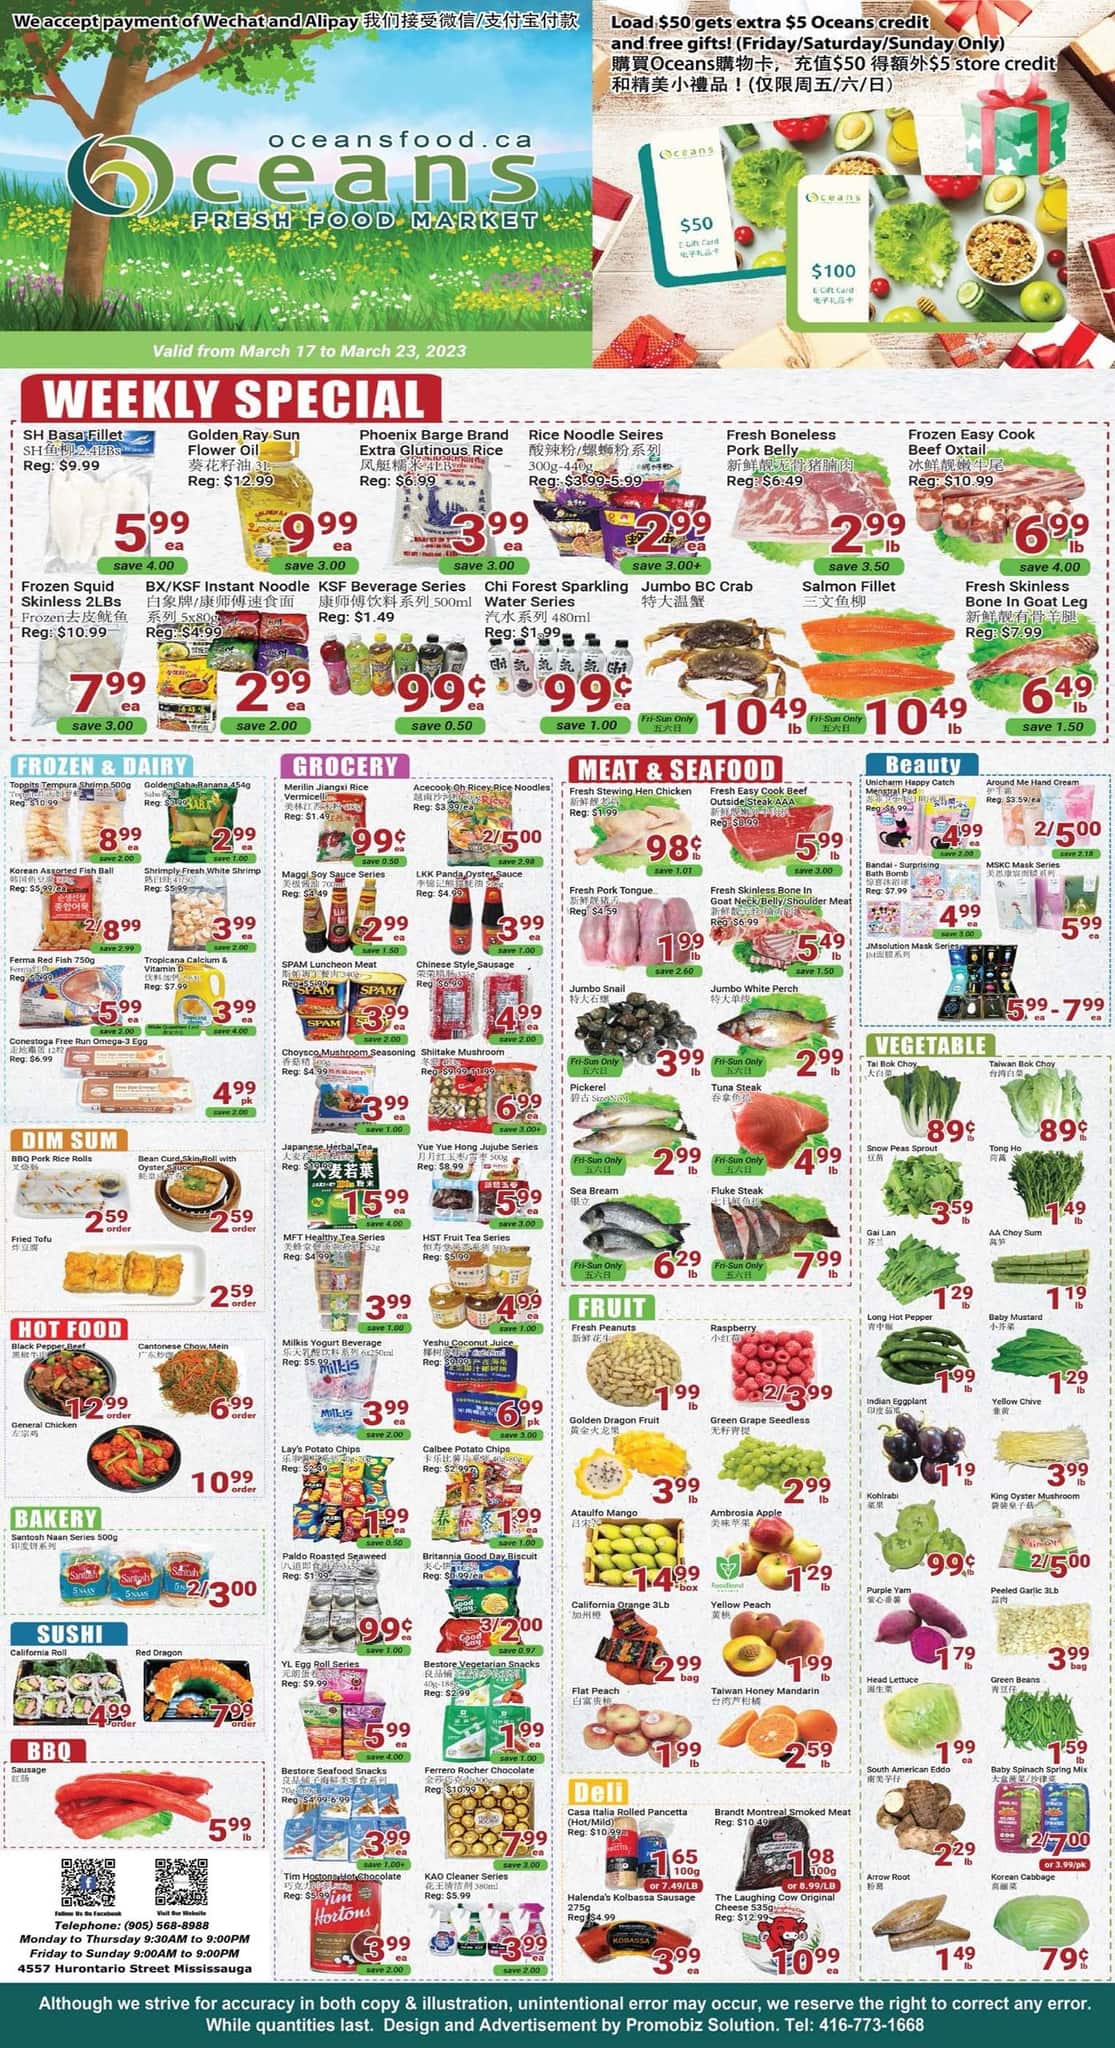 Oceans Fresh Food Market - Mississauga Hurontario Street - Weekly Flyer Specials - Page 1